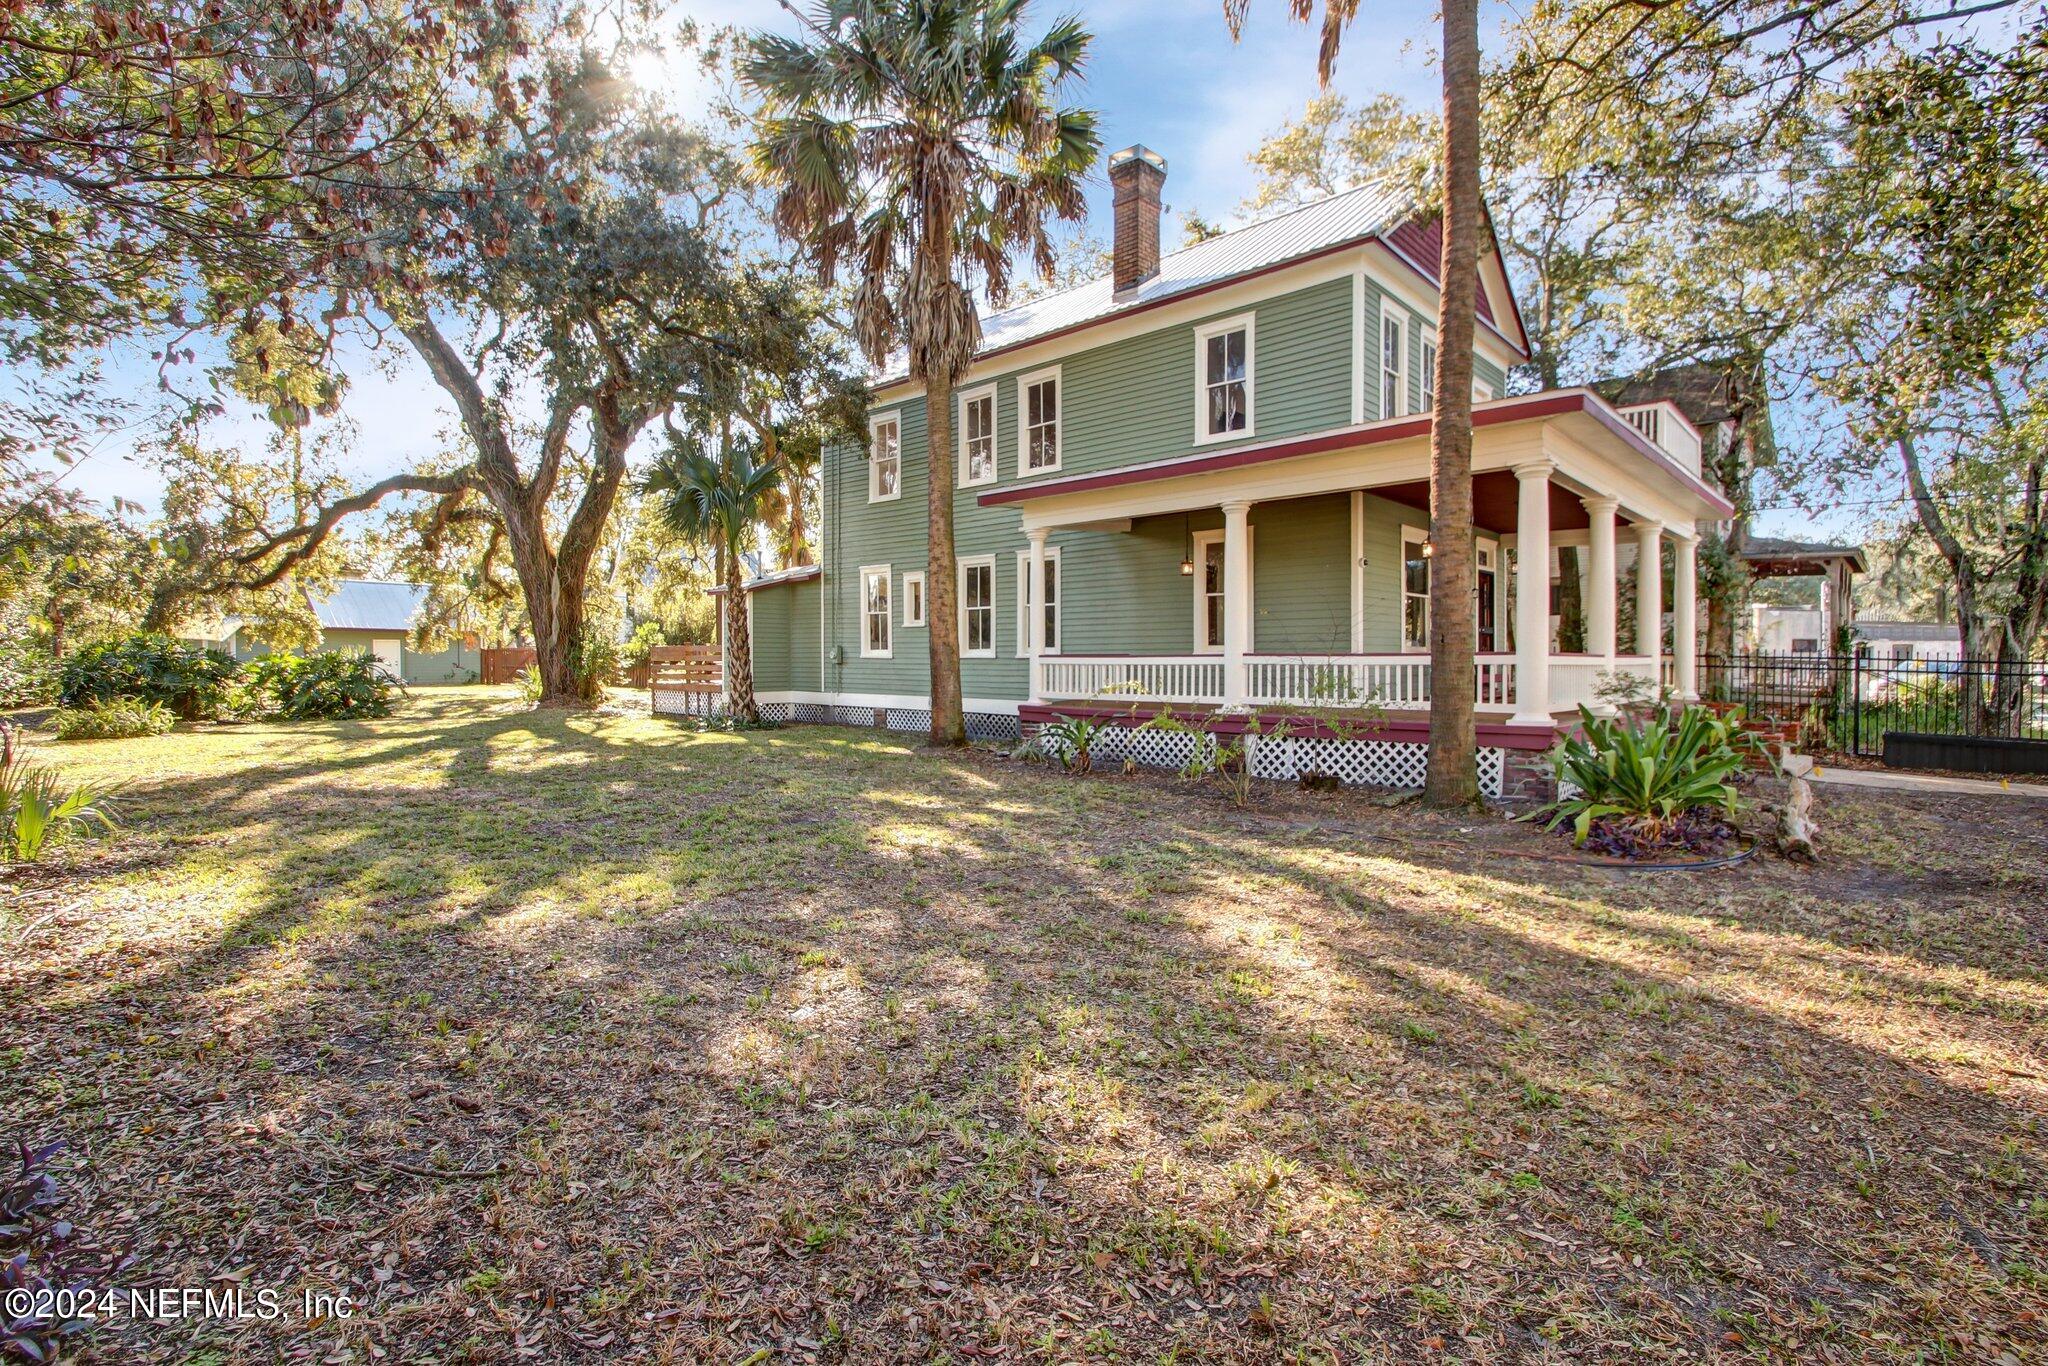 Jacksonville, FL home for sale located at 36 W 6th Street, Jacksonville, FL 32206